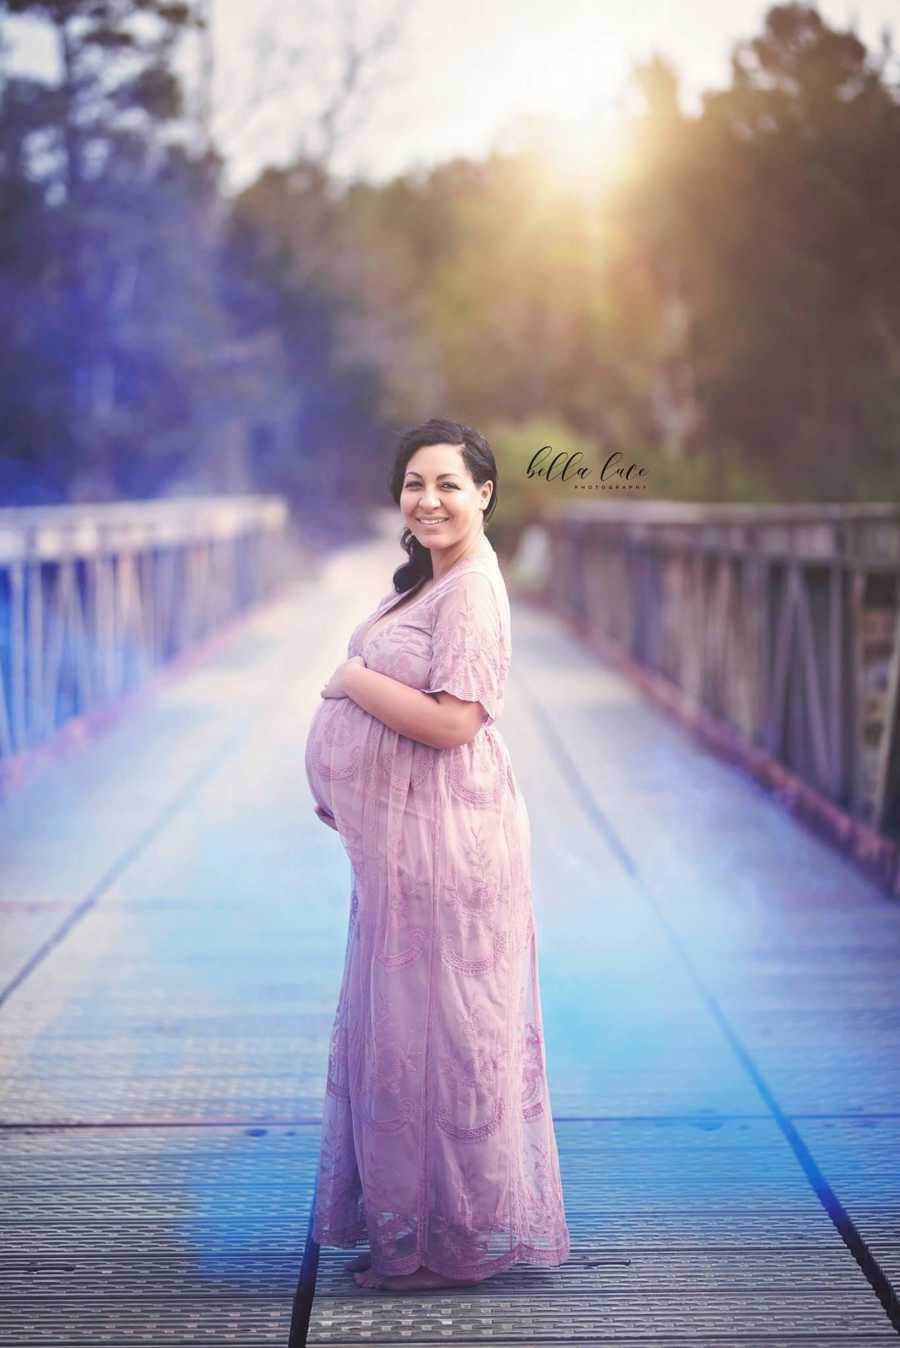 Woman pregnant with third child she struggled to have stands holding stomach on bridge